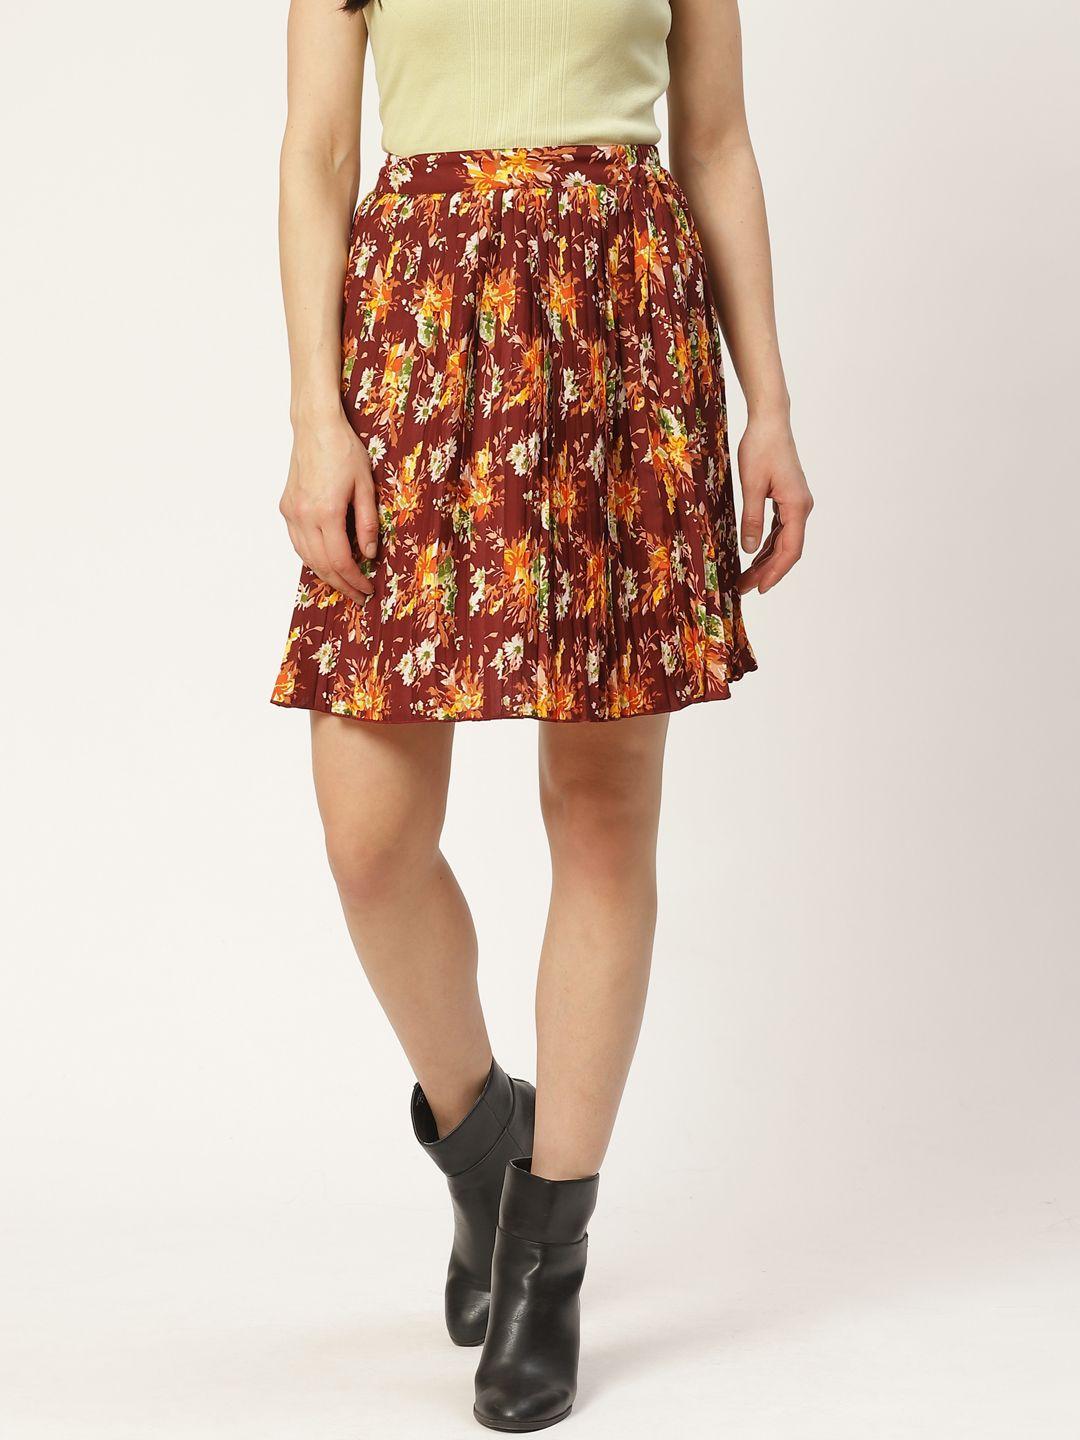 antheaa women rust red & yellow accordion pleated floral printed a-line skirt